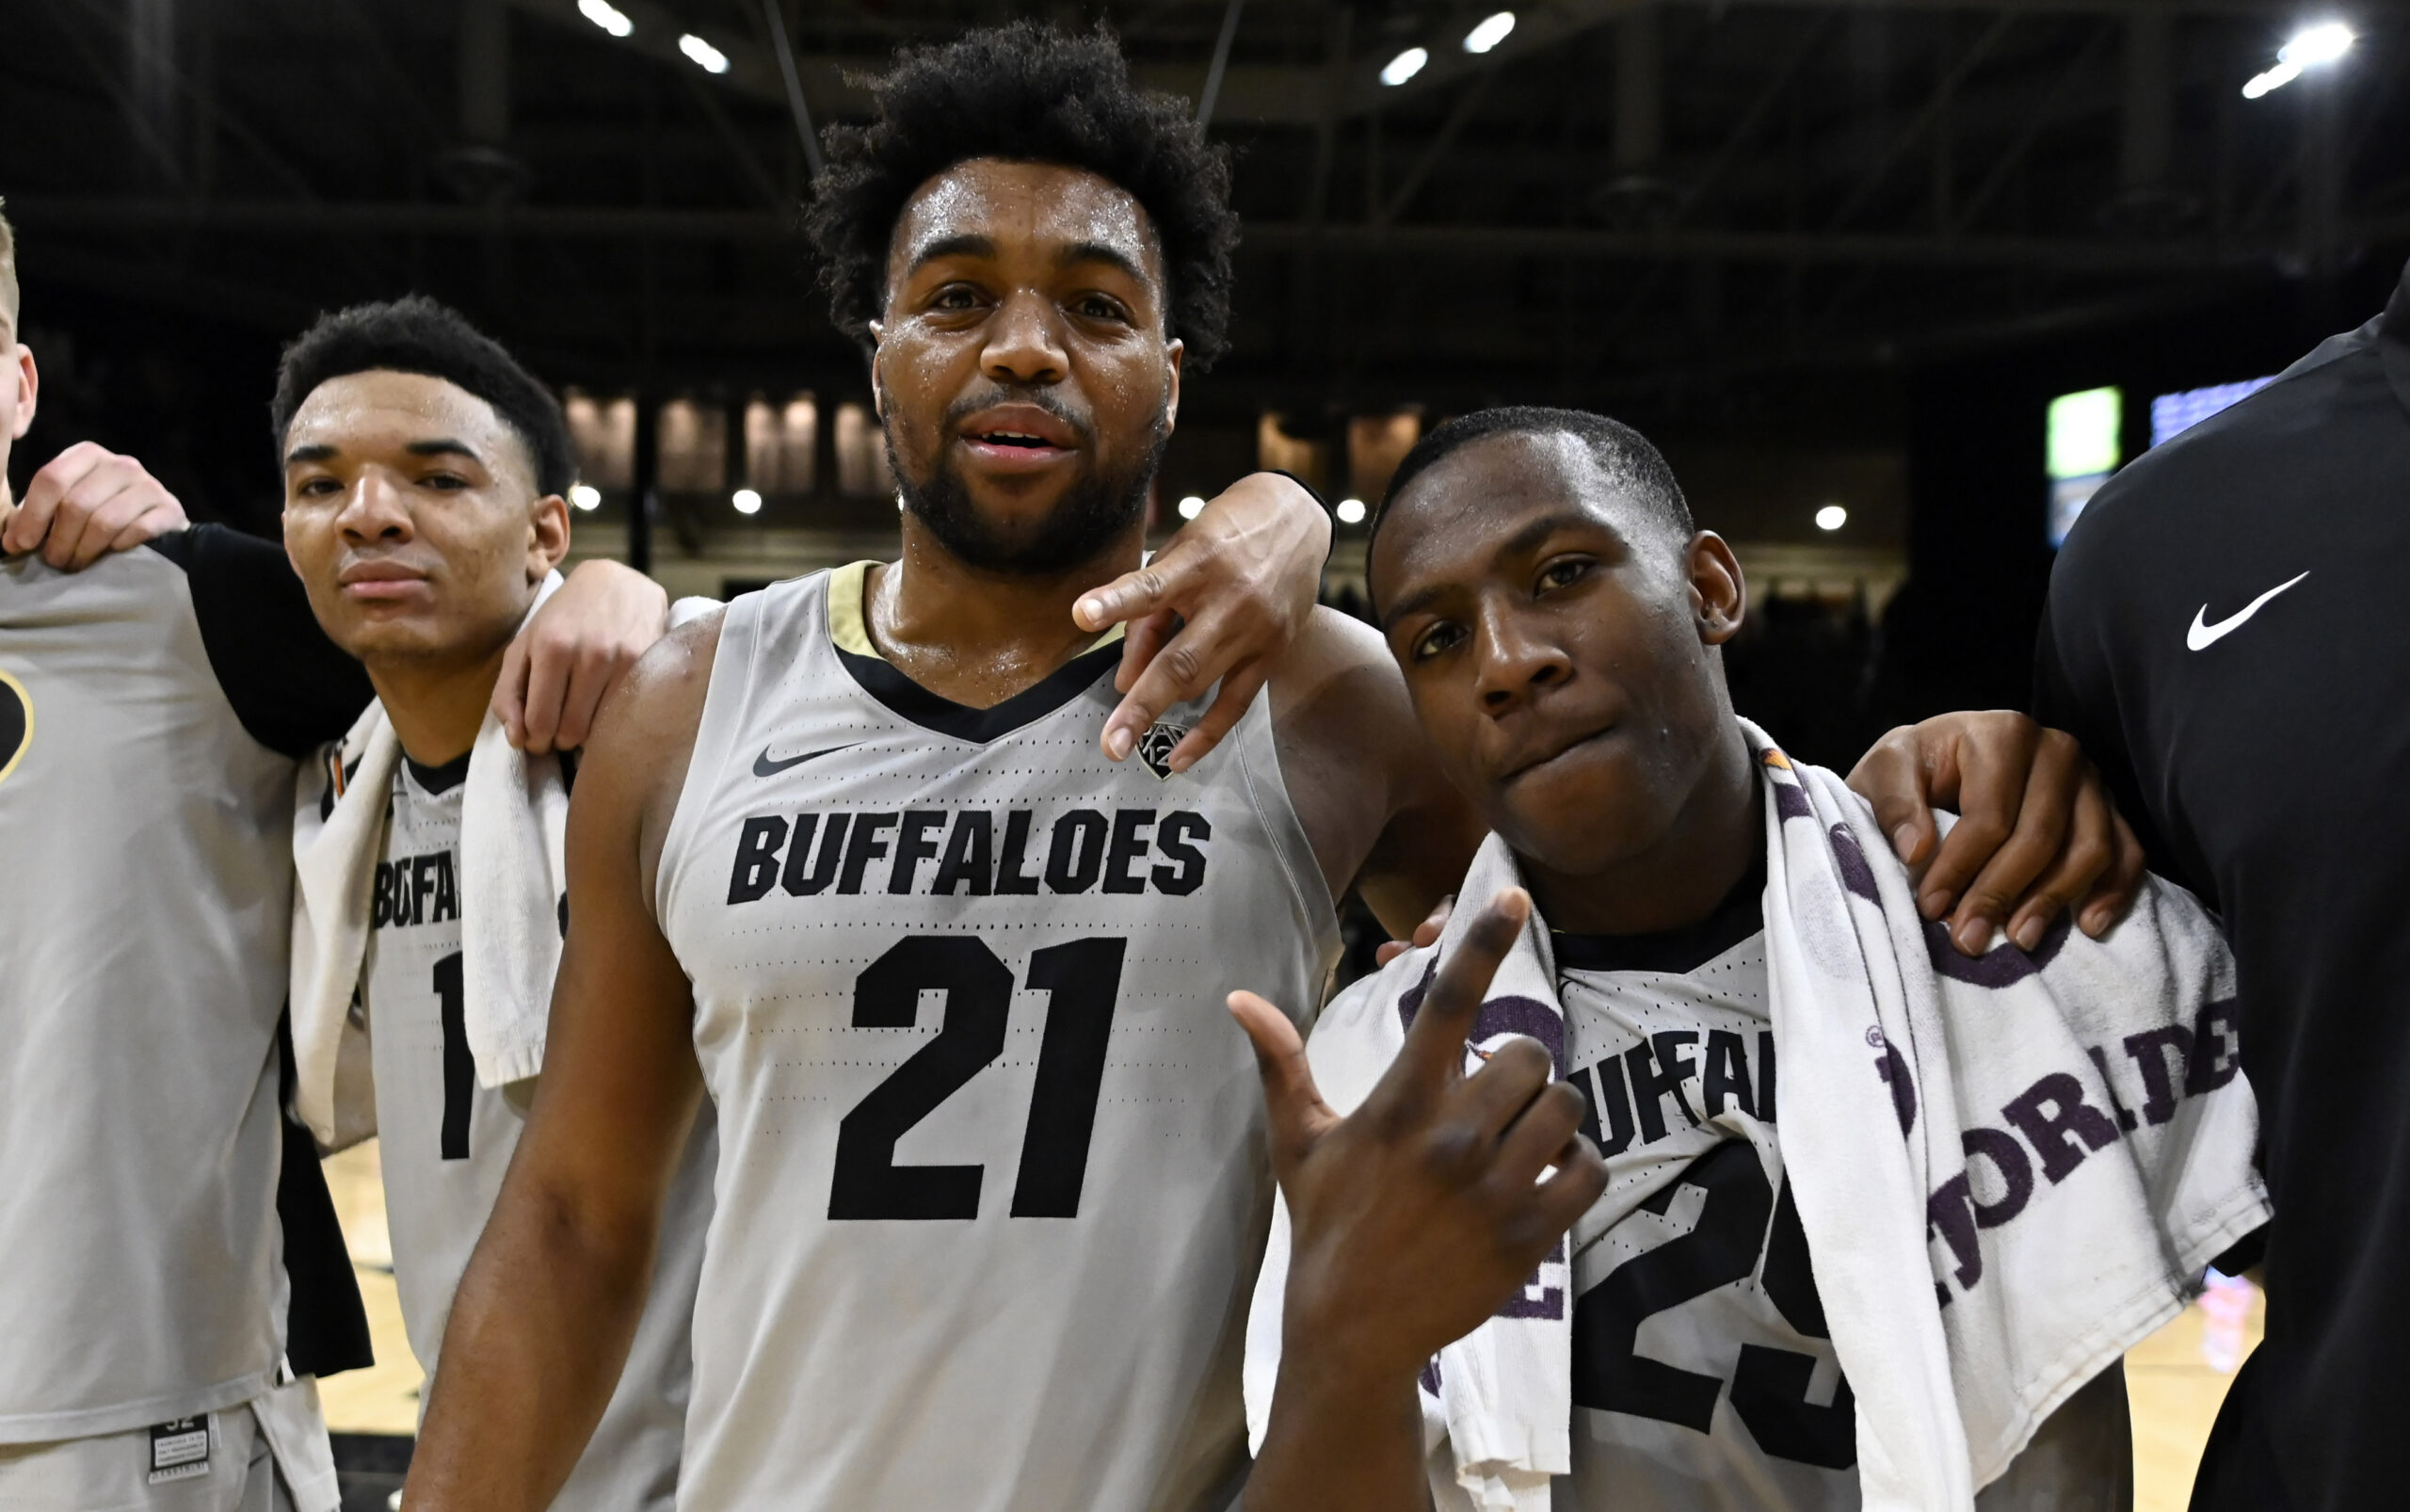 WATCH: Emotional Evan Battey reacts to message from former teammates